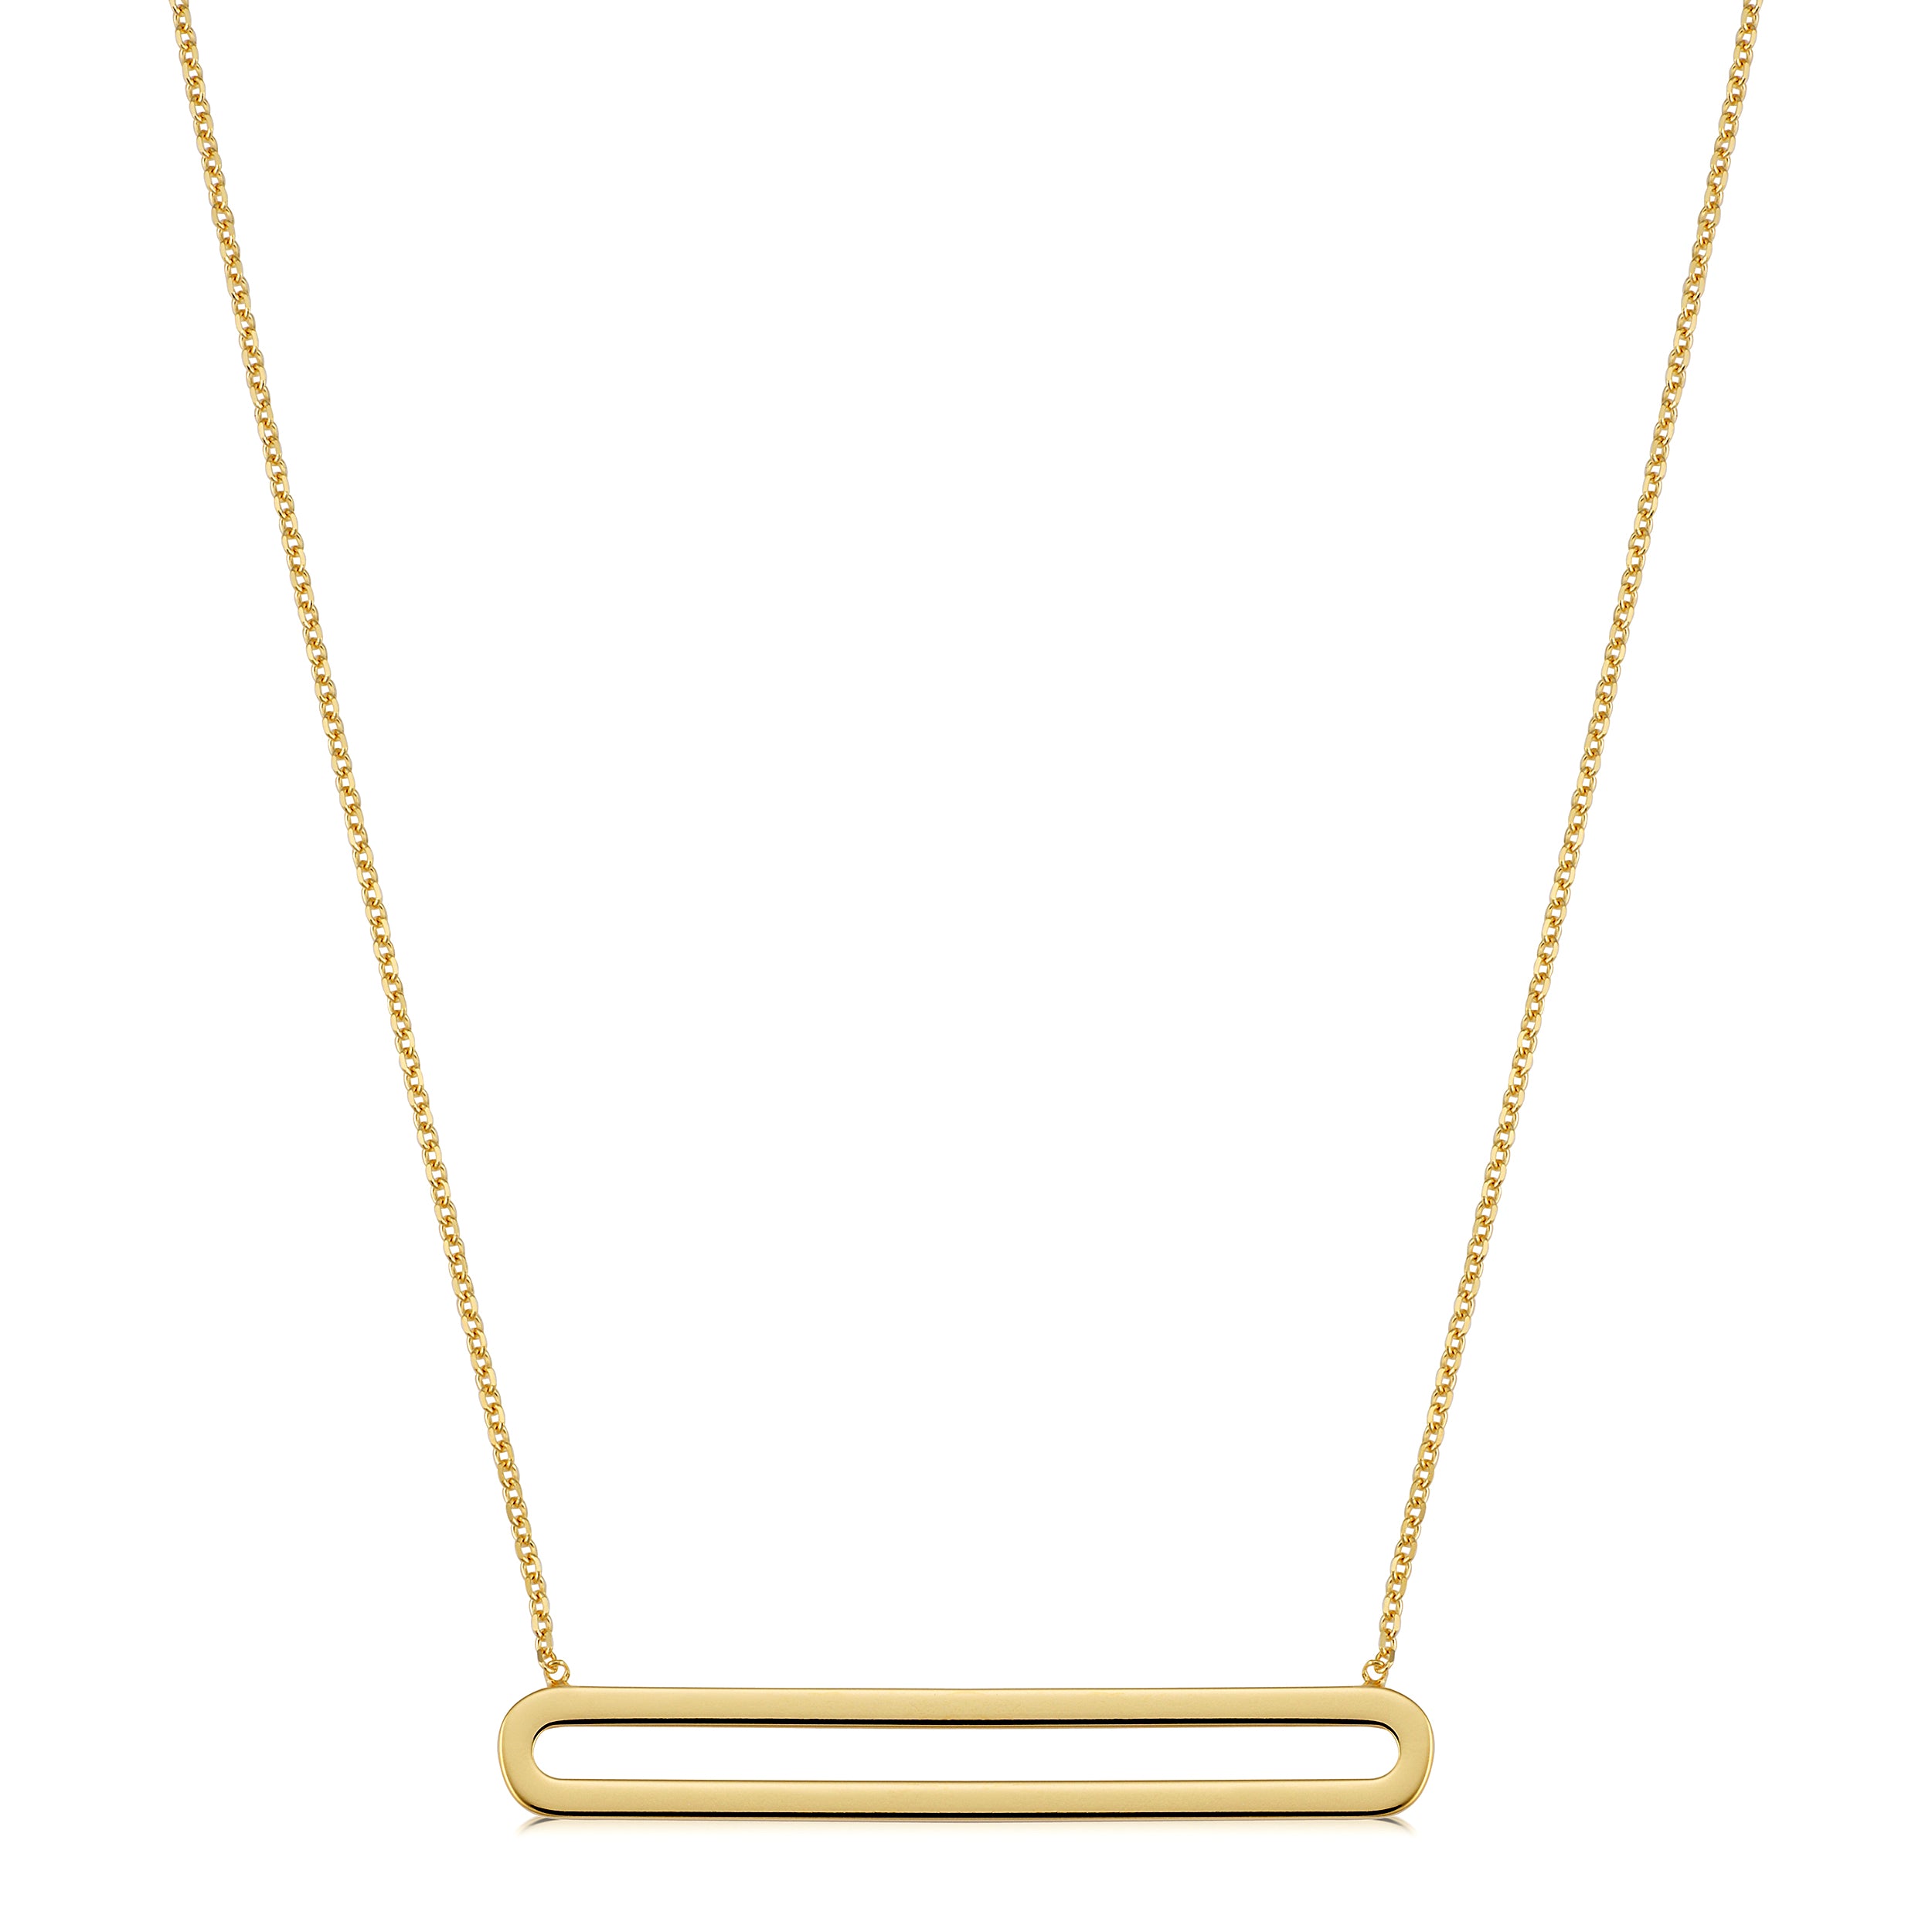 14K Yellow Gold Oval Bar Pendant Necklace, 18" fine designer jewelry for men and women